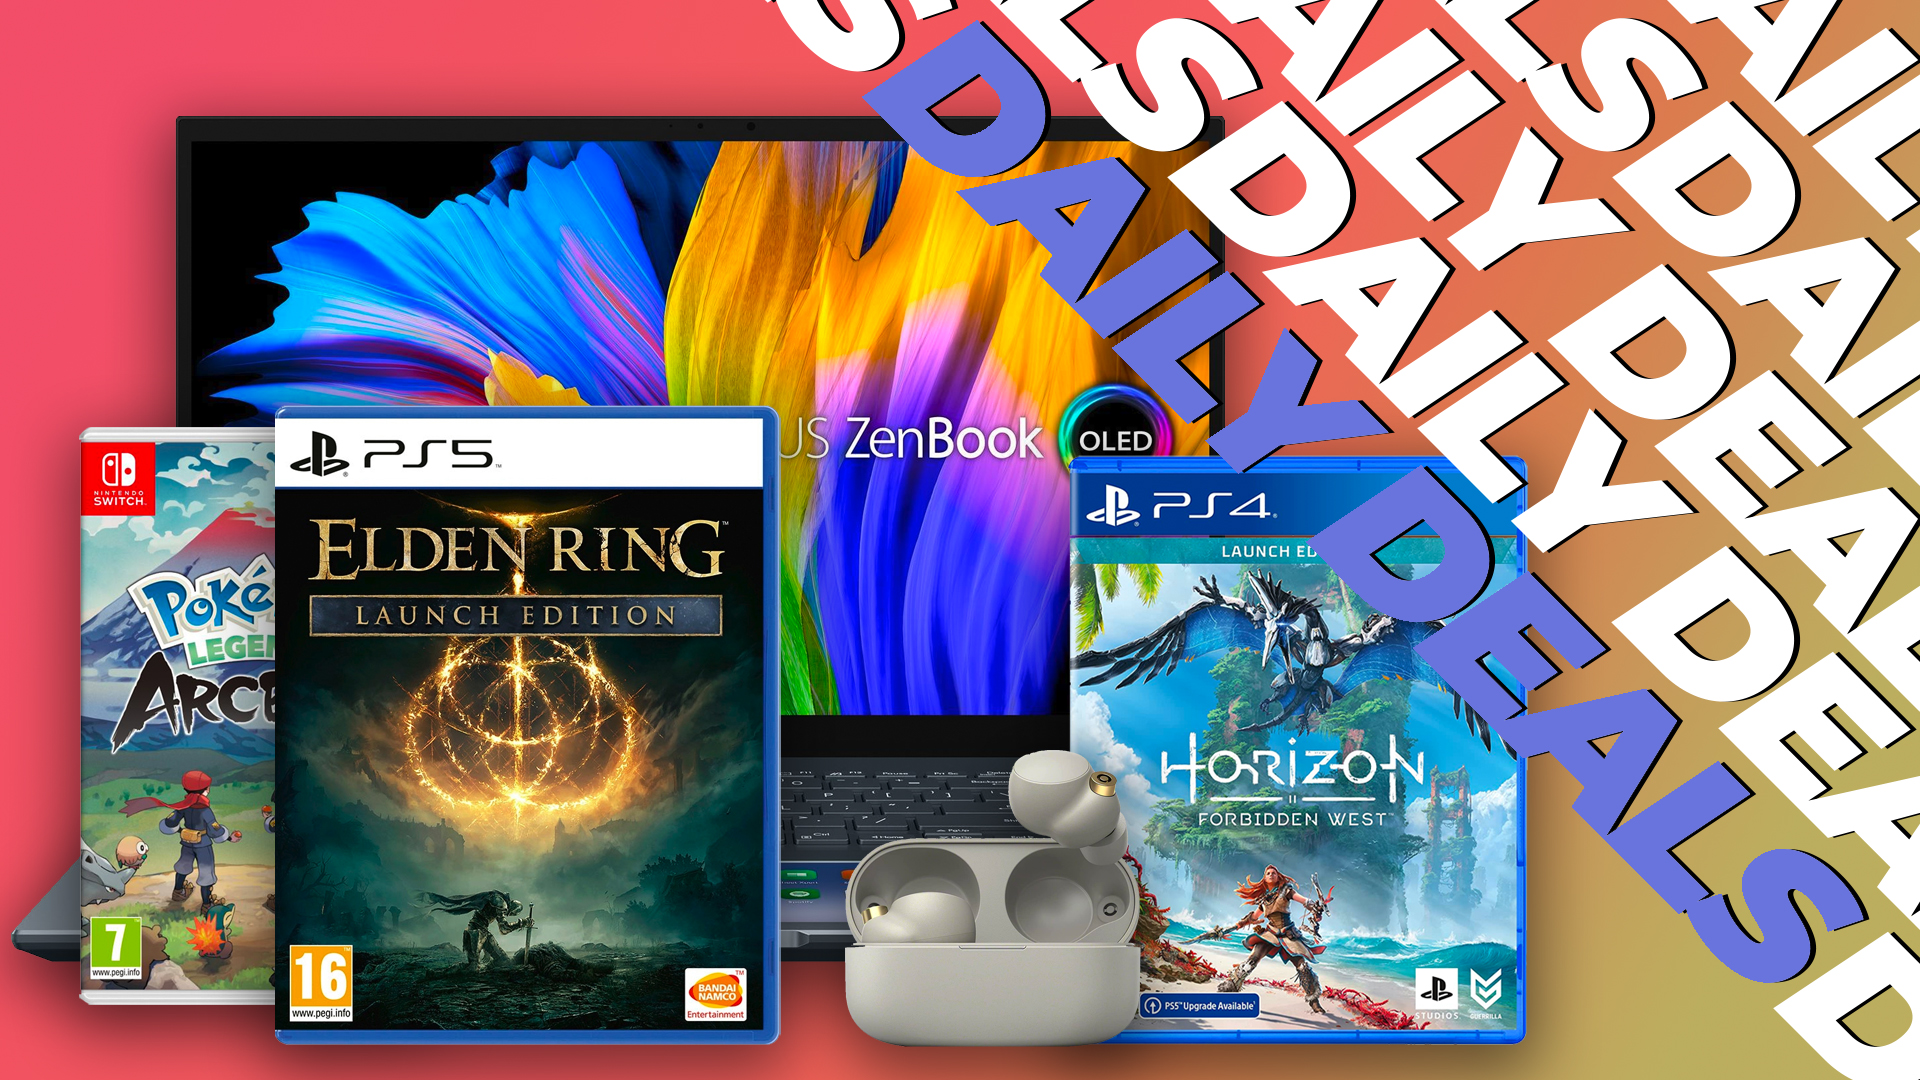 Elden Ring is already cheaper before release: Daily Deals | Laptop Mag